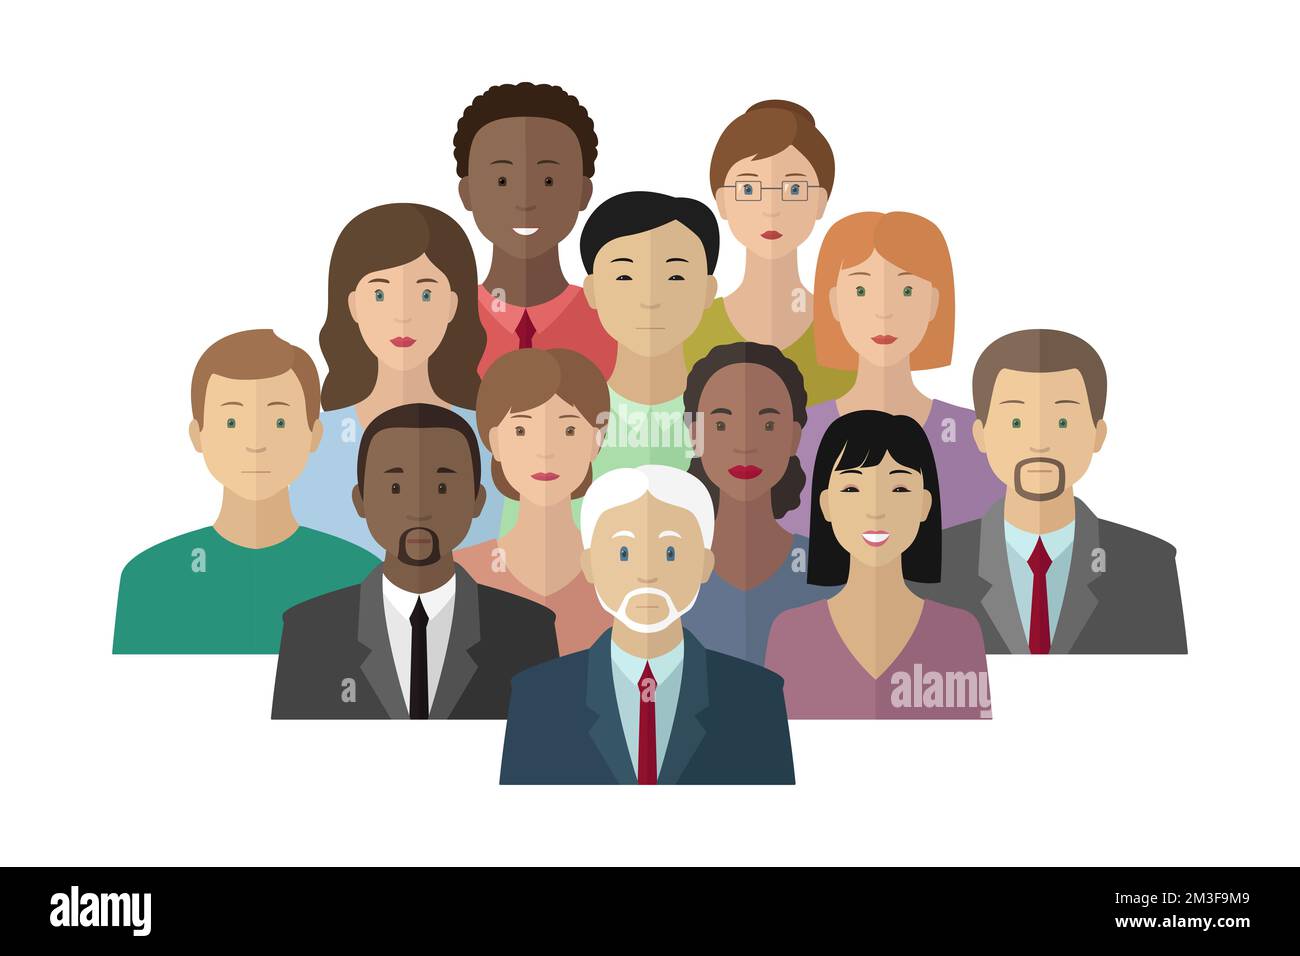 Group of Caucasian, African-American and Asian people. Multiethnic society. Vector illustration. Stock Vector